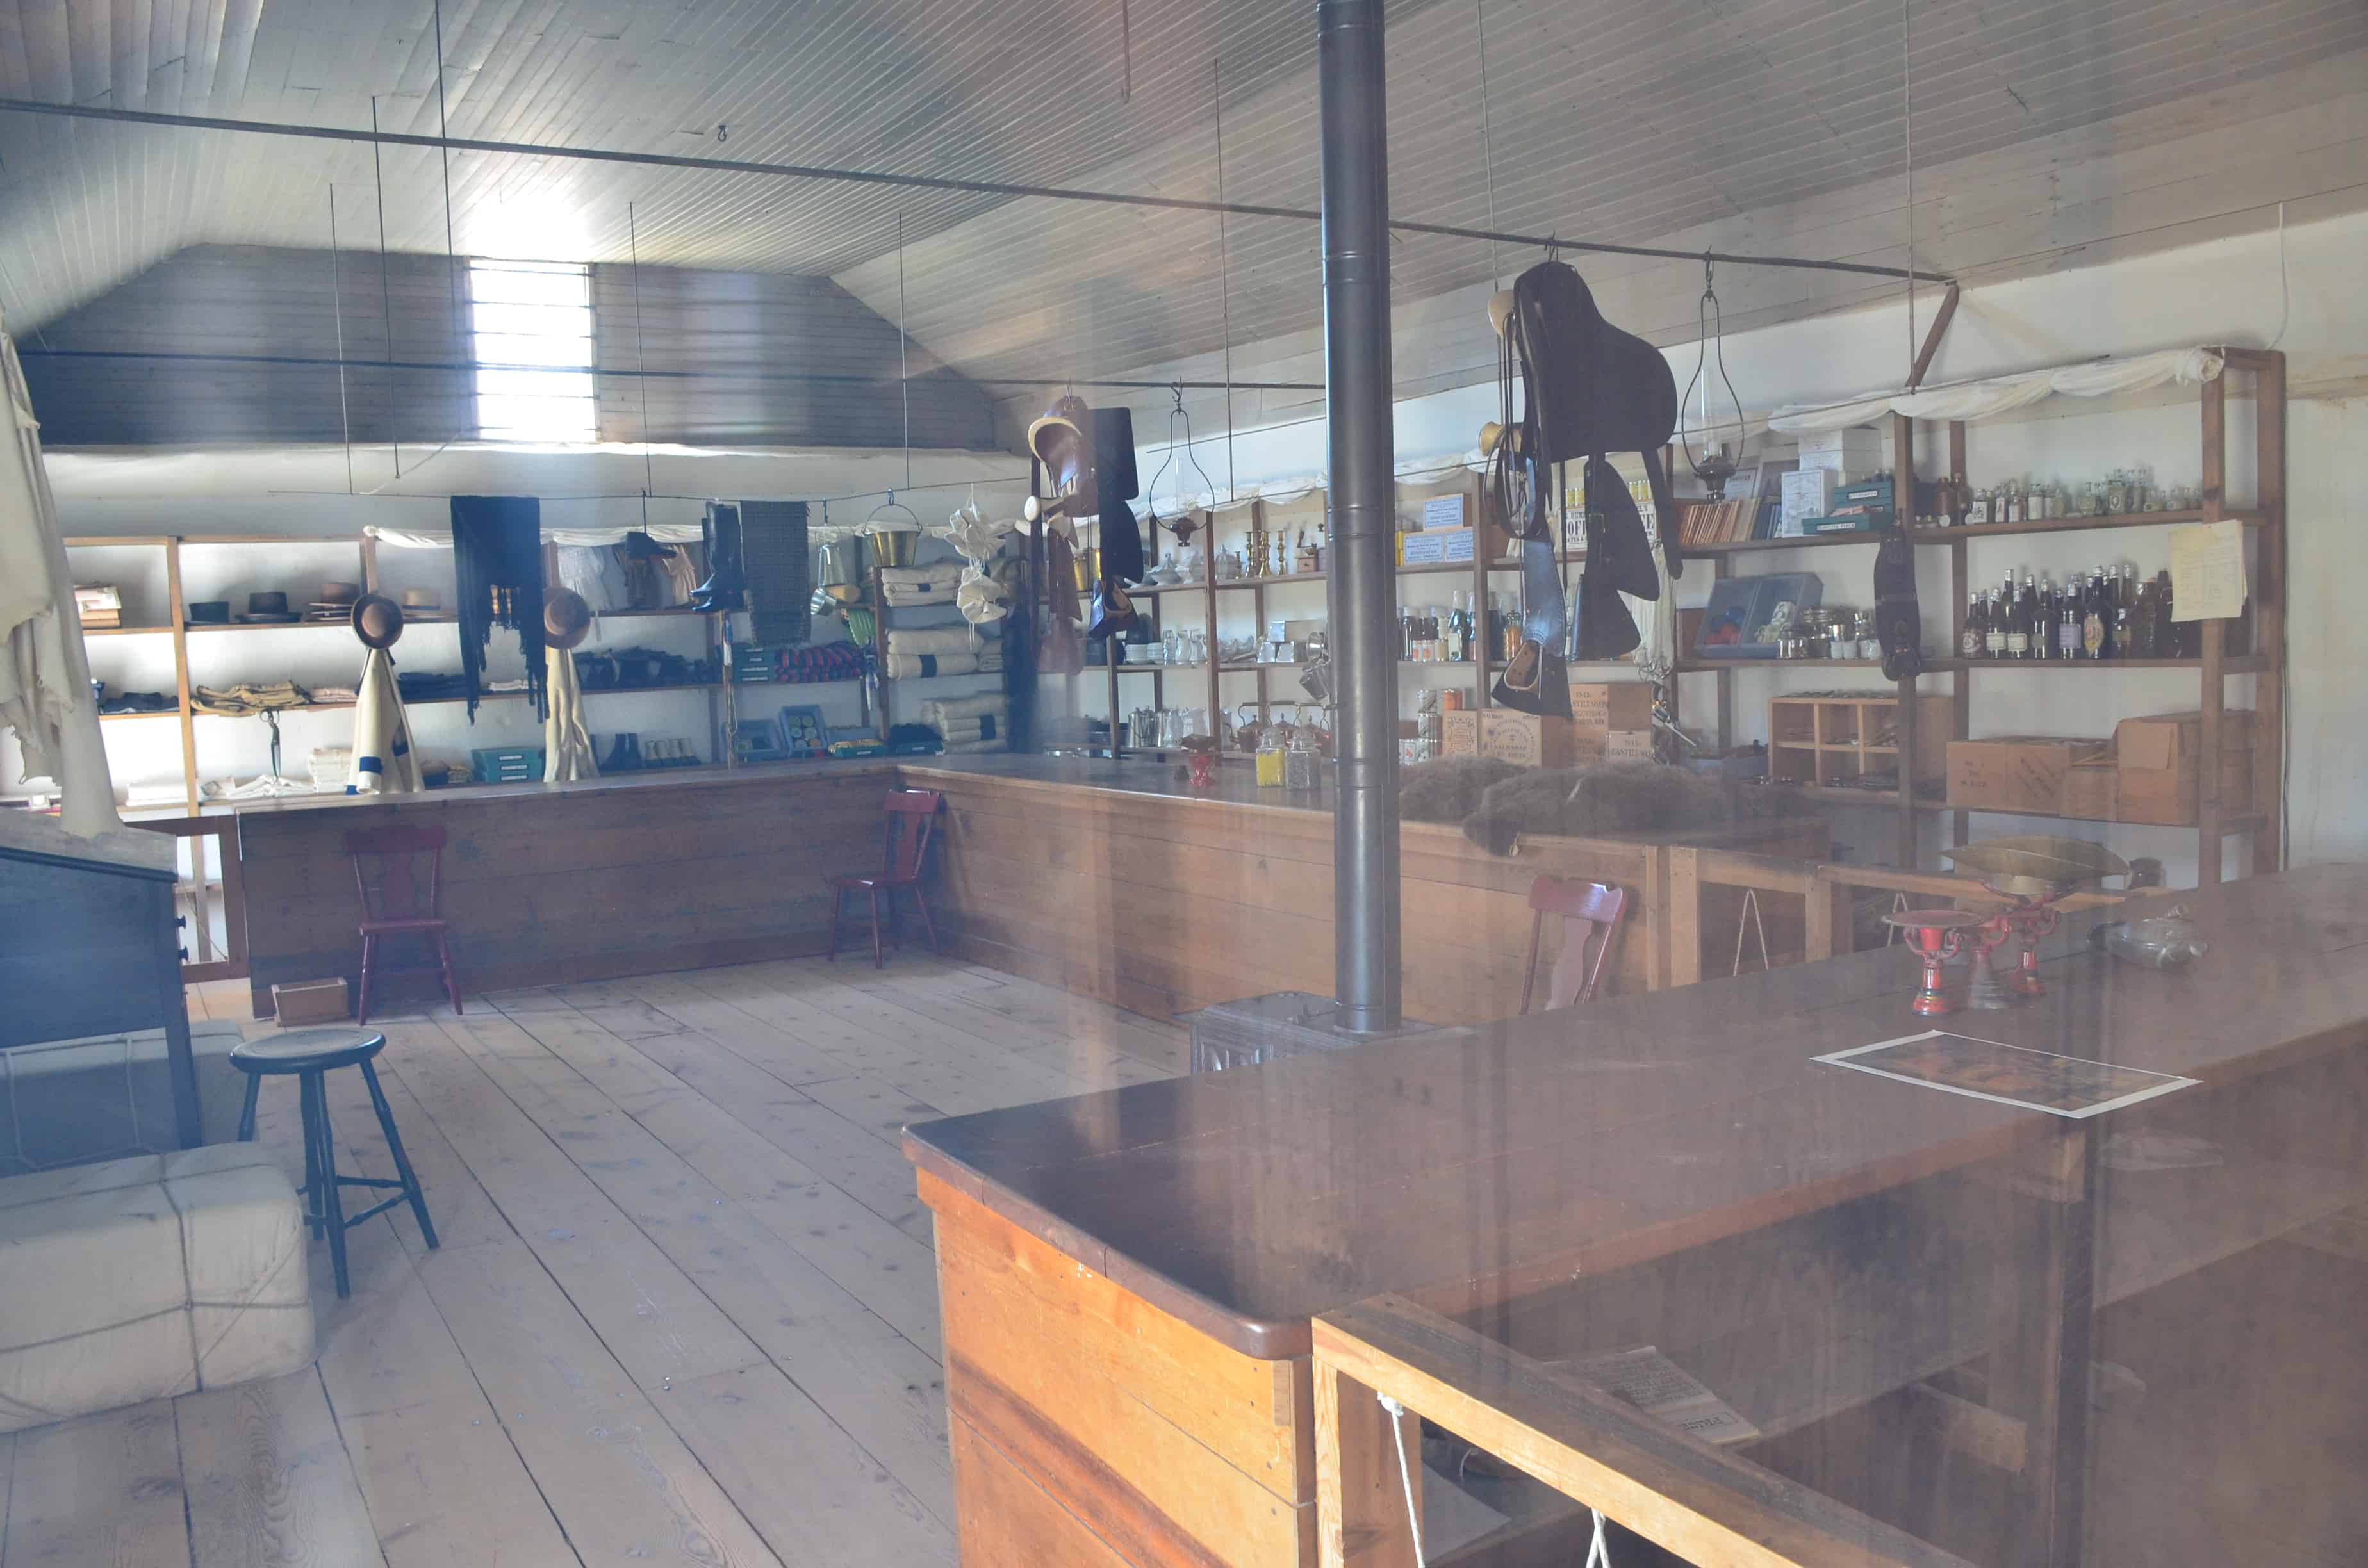 Post trader's store at Fort Laramie National Historic Site in Wyoming